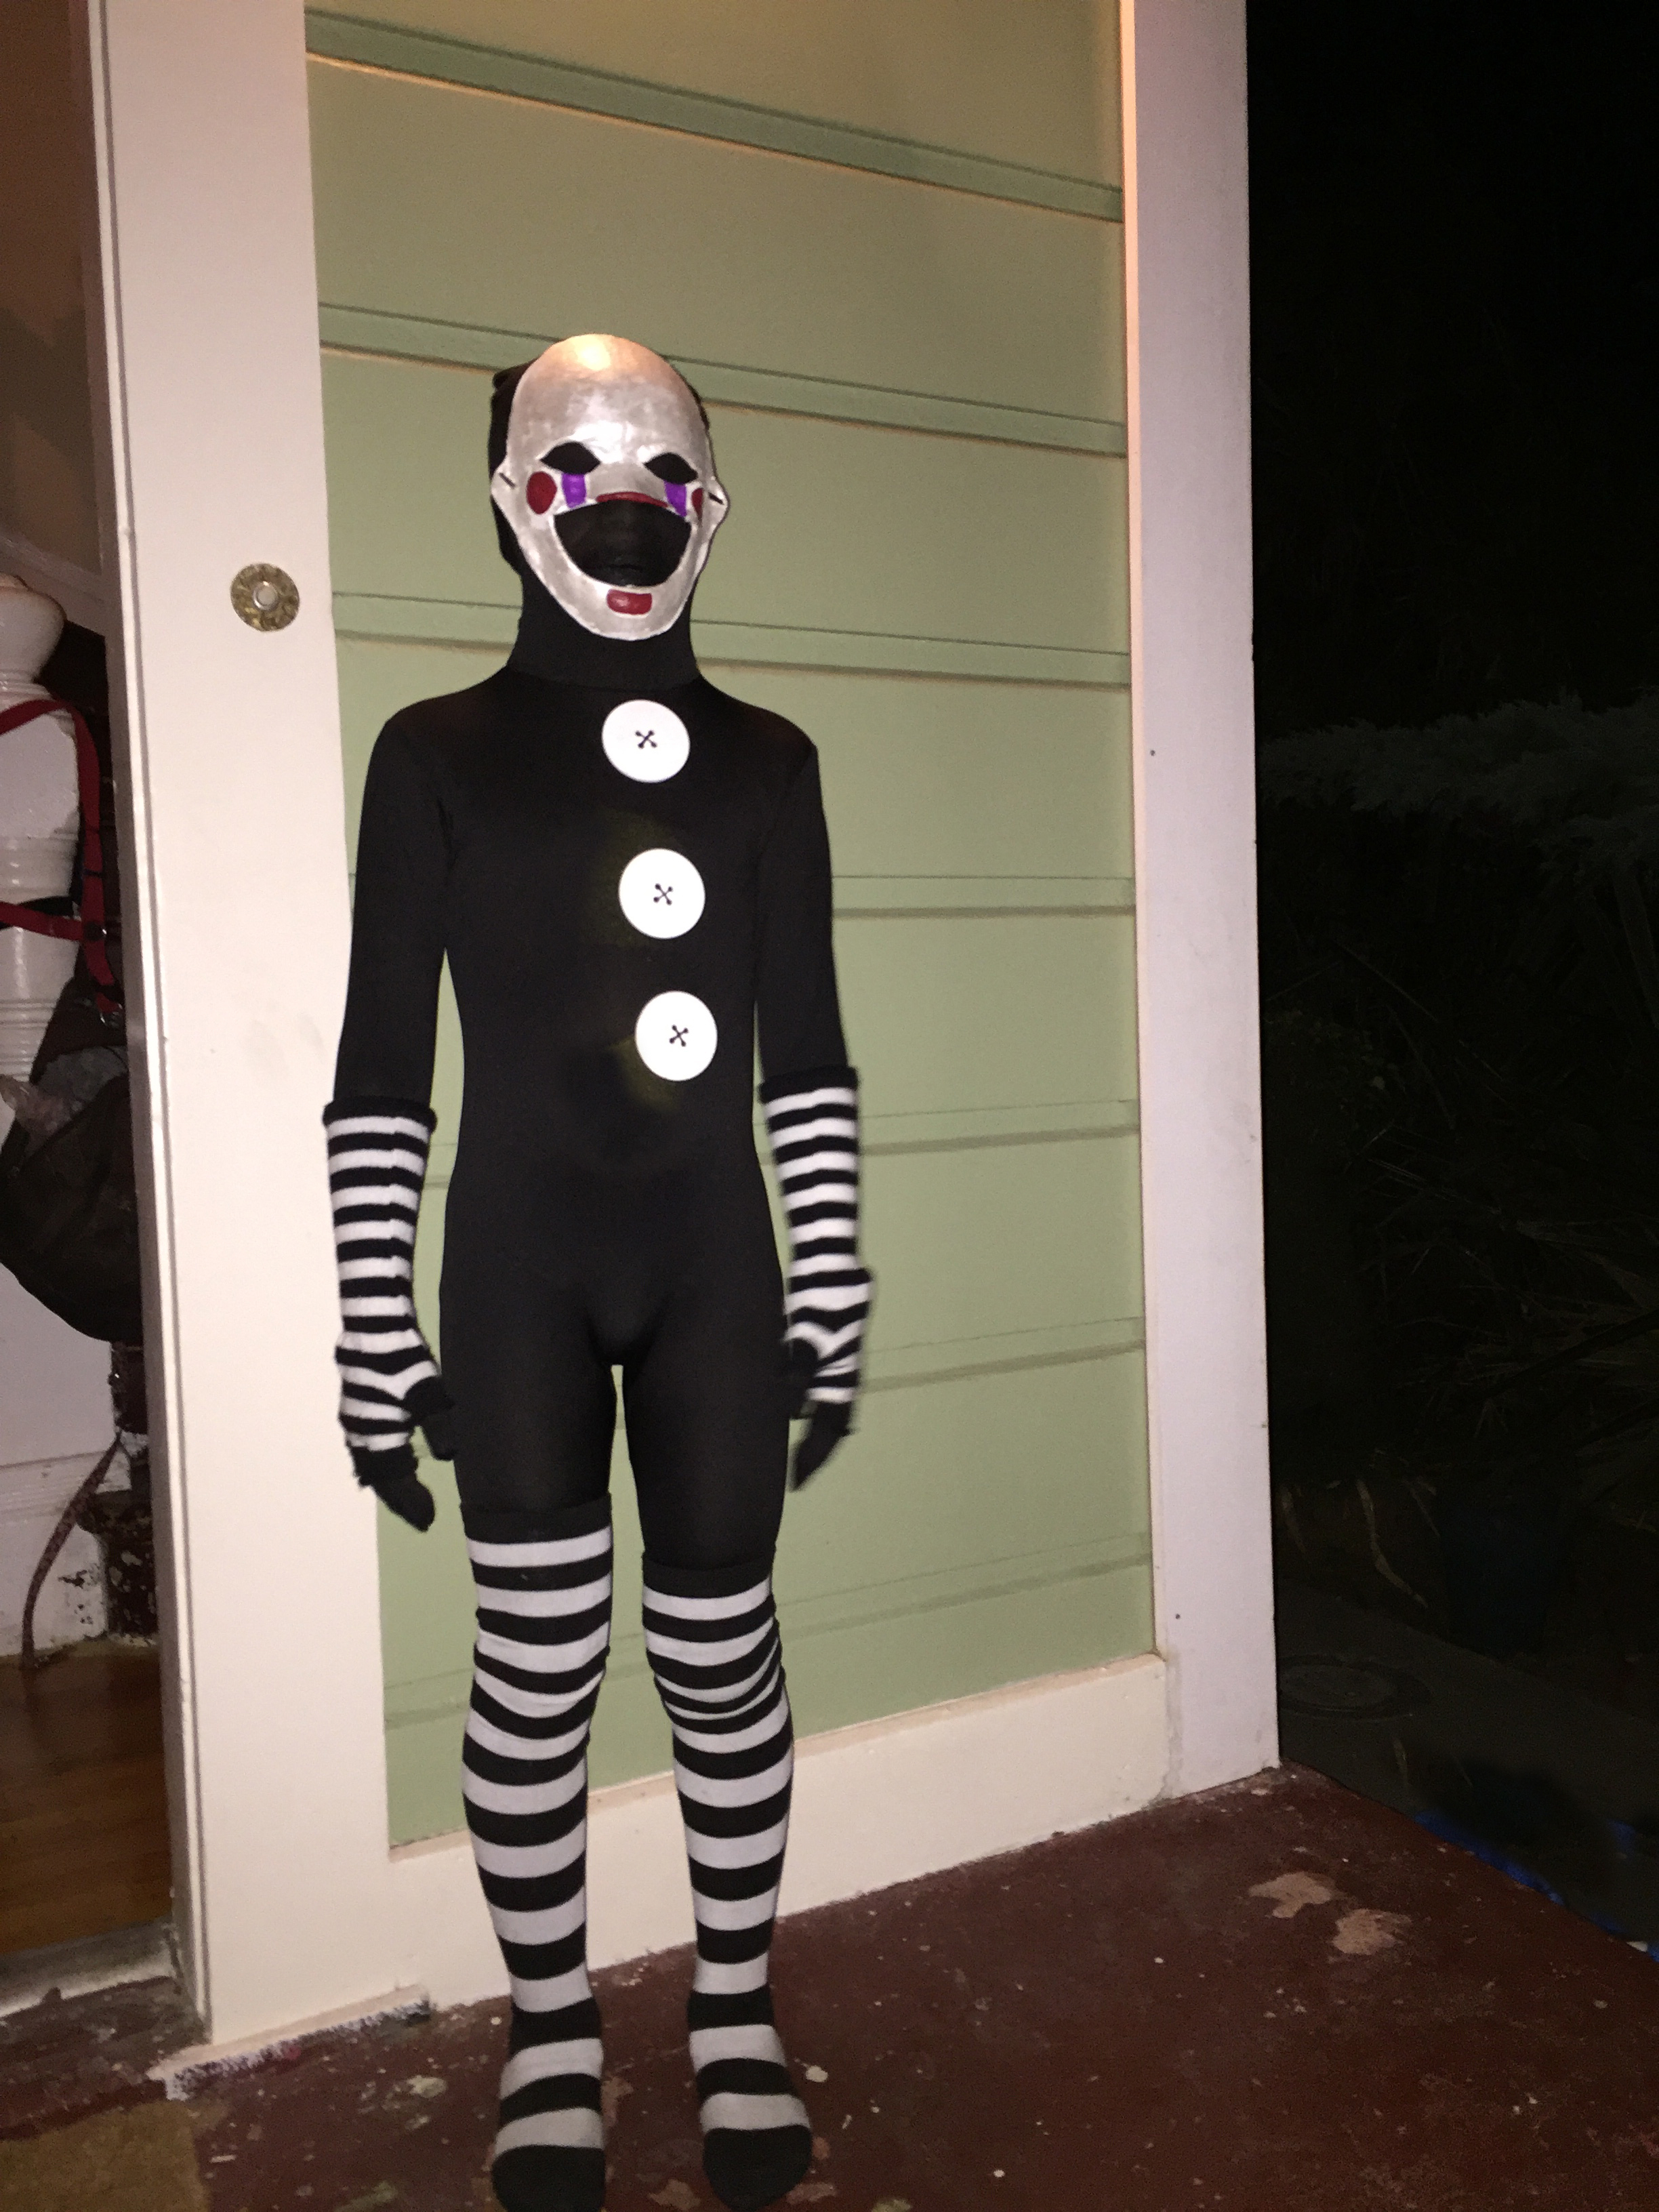 Marionette costume from five nights at freddy's.